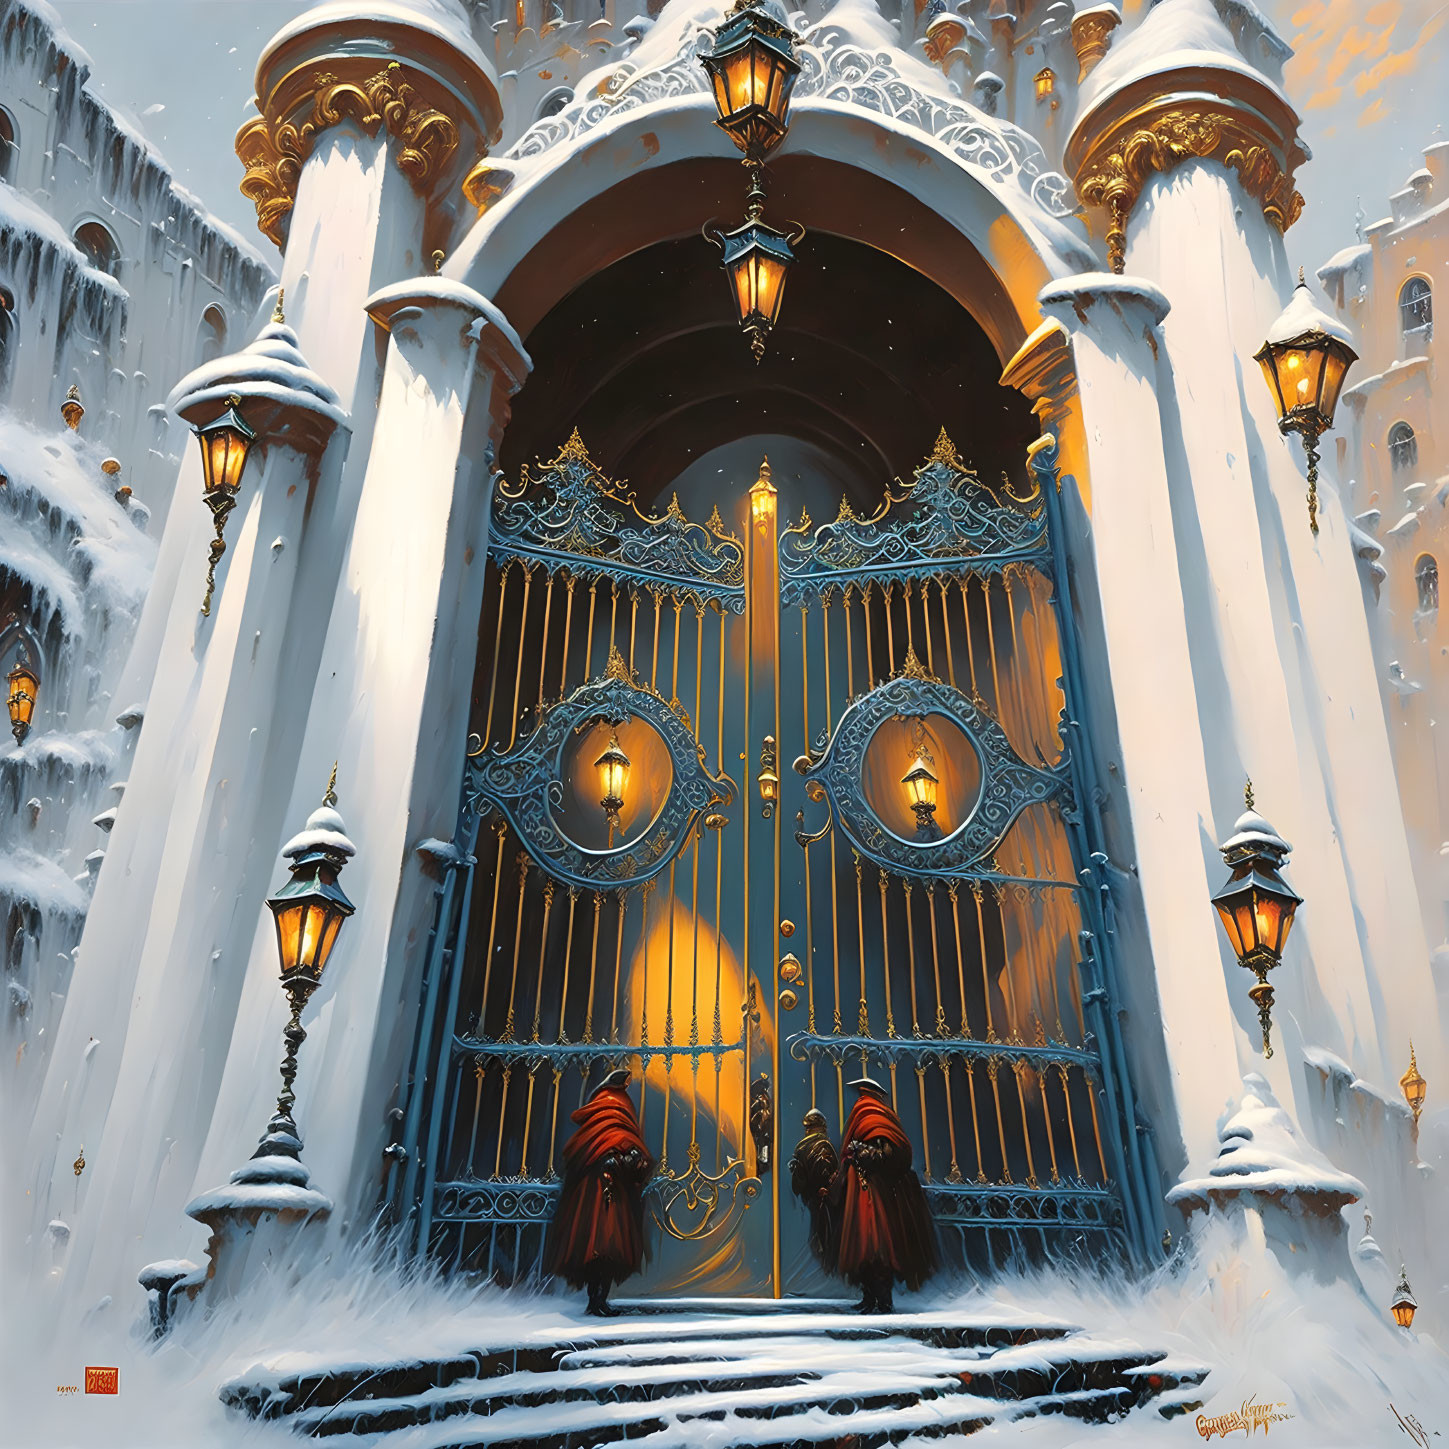 Snow-covered castle with ornate blue gates and red-robed guards